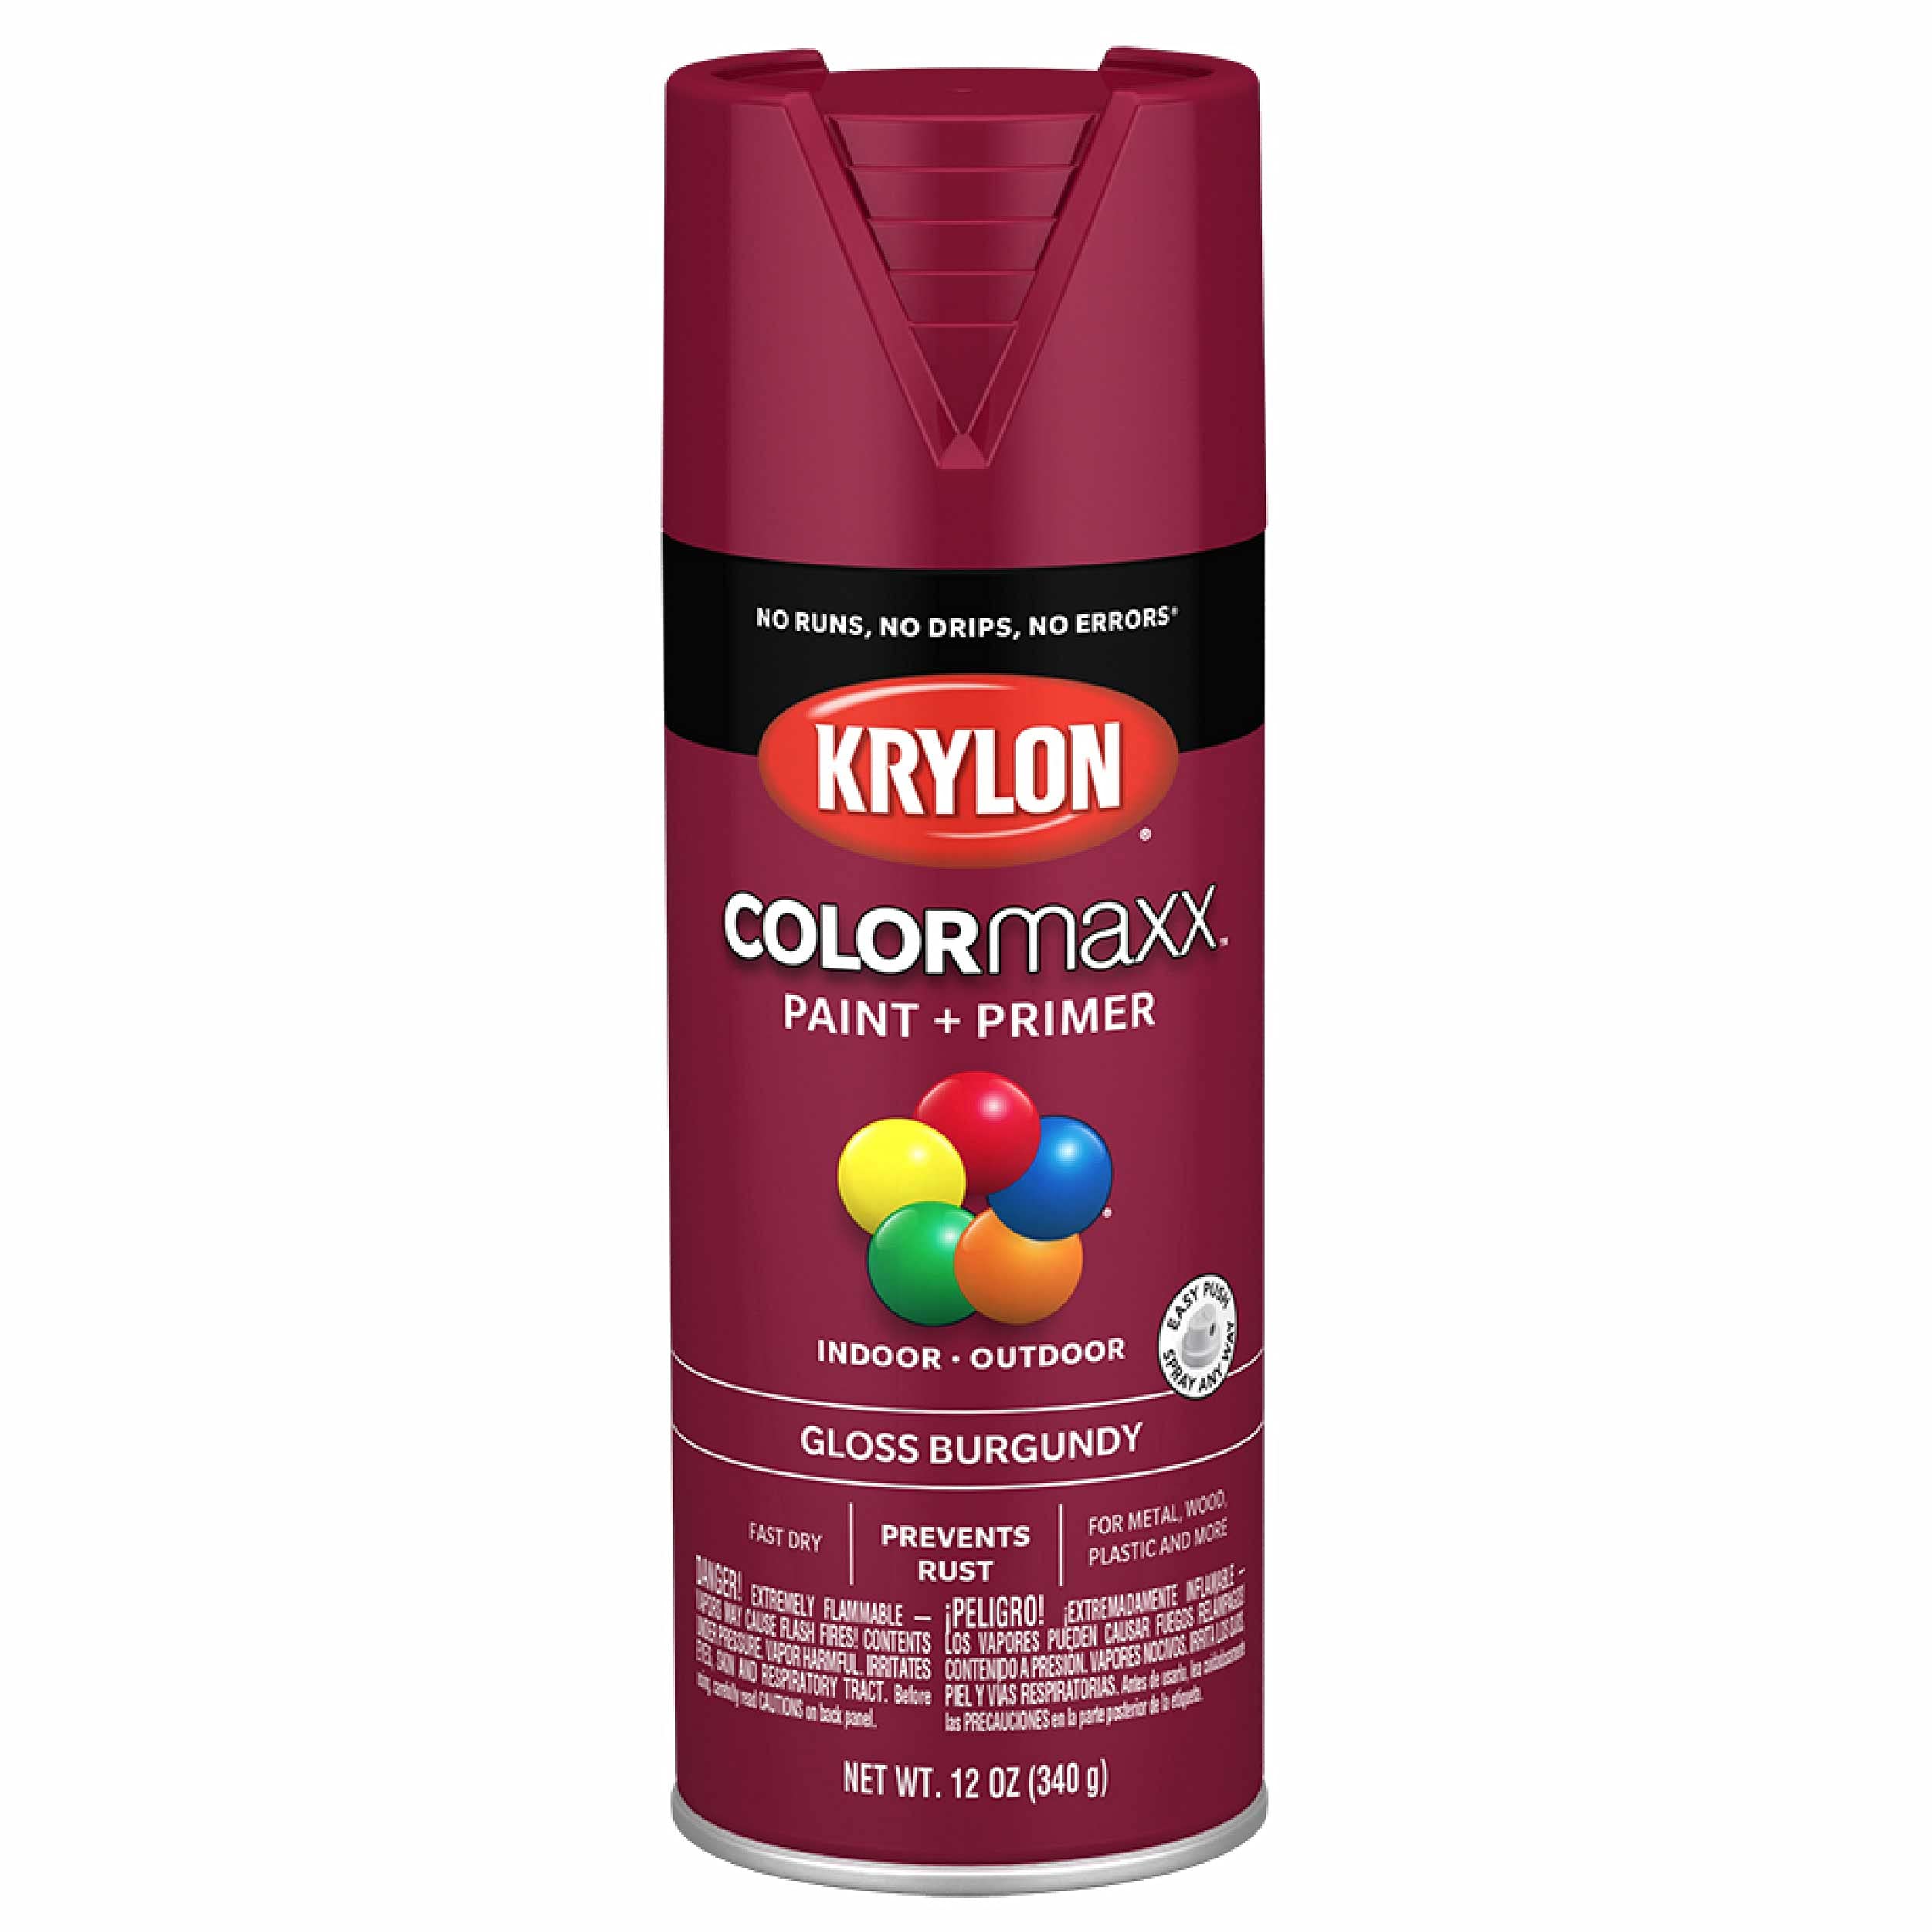 12-Oz Krylon COLORmaxx Indoor/Outdoor Spray Paint and Primer (Gloss Burgundy, K05508007) $2.10 + Free Shipping w/ Prime or on $25+